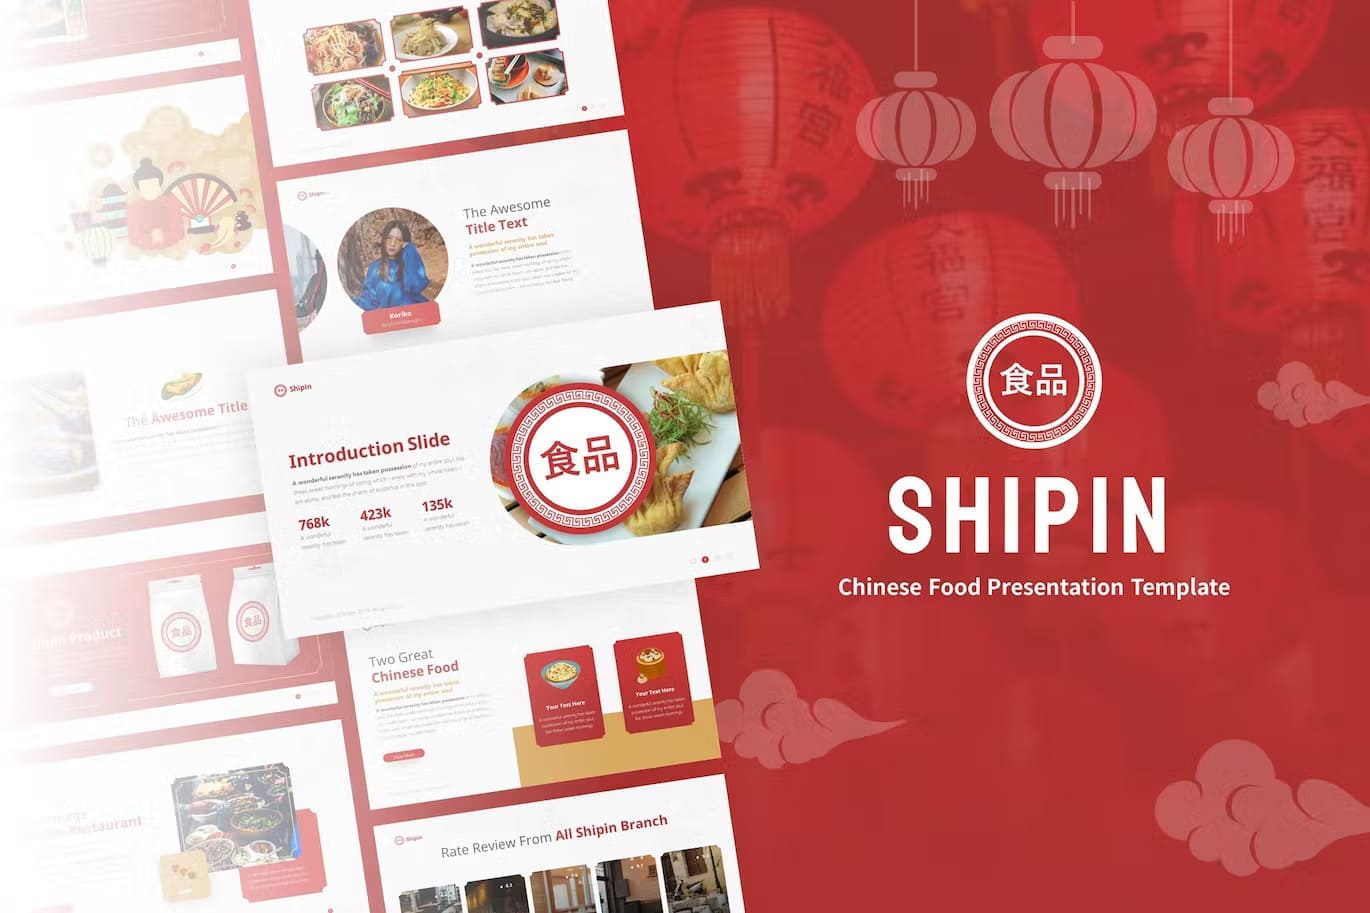 Slides Shipin chinese food powerpoint template: Introduction Slide, The Awesome Title Text.